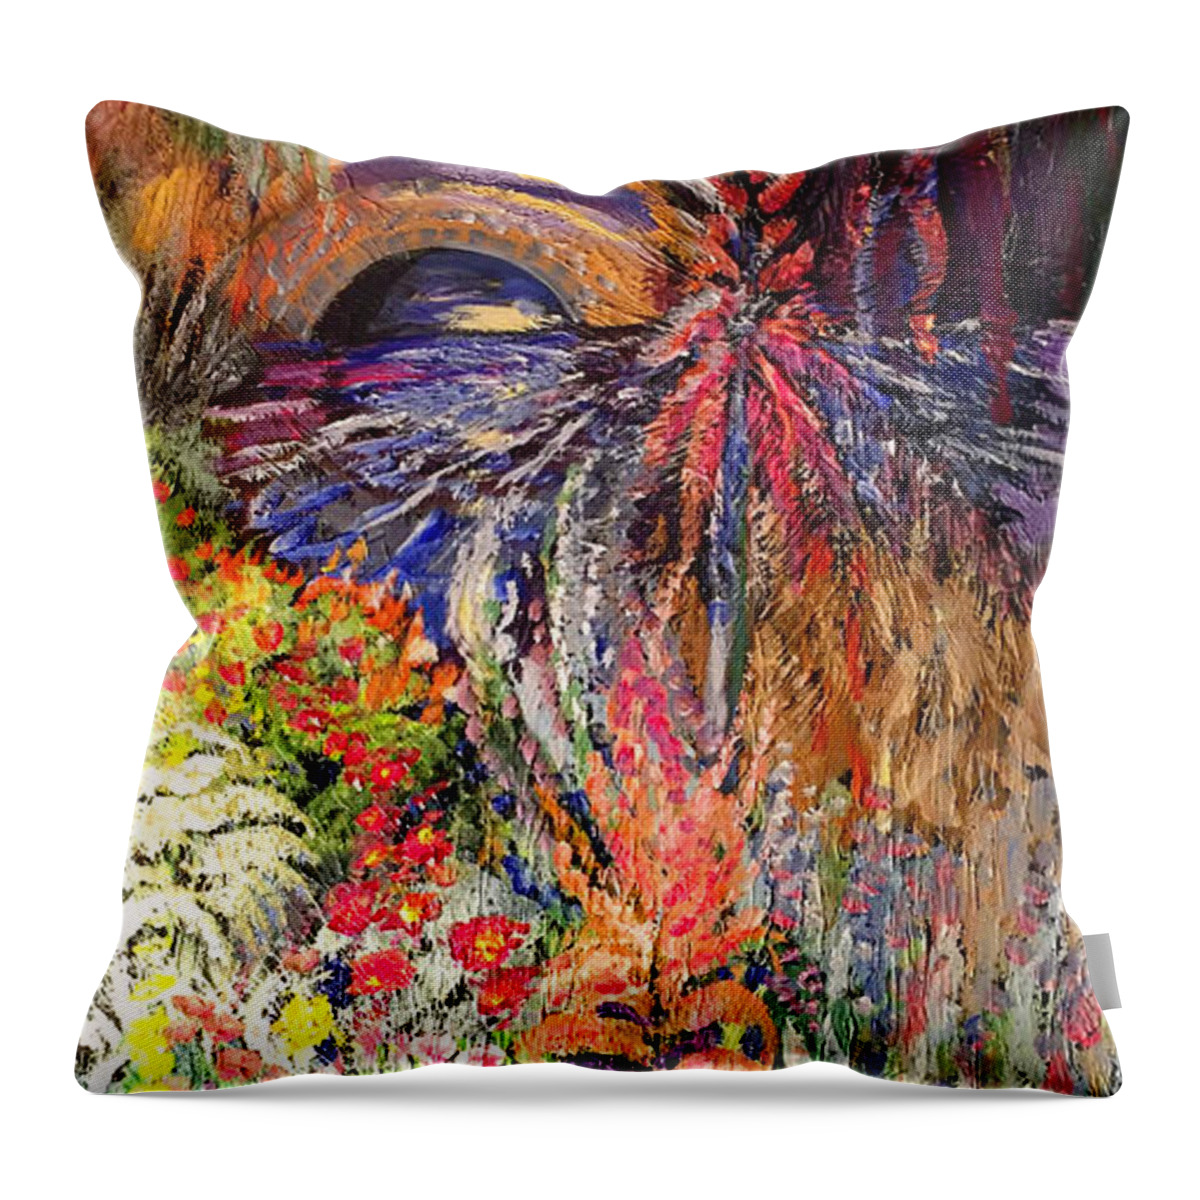 The Garden Throw Pillow featuring the painting The Garden by Amzie Adams